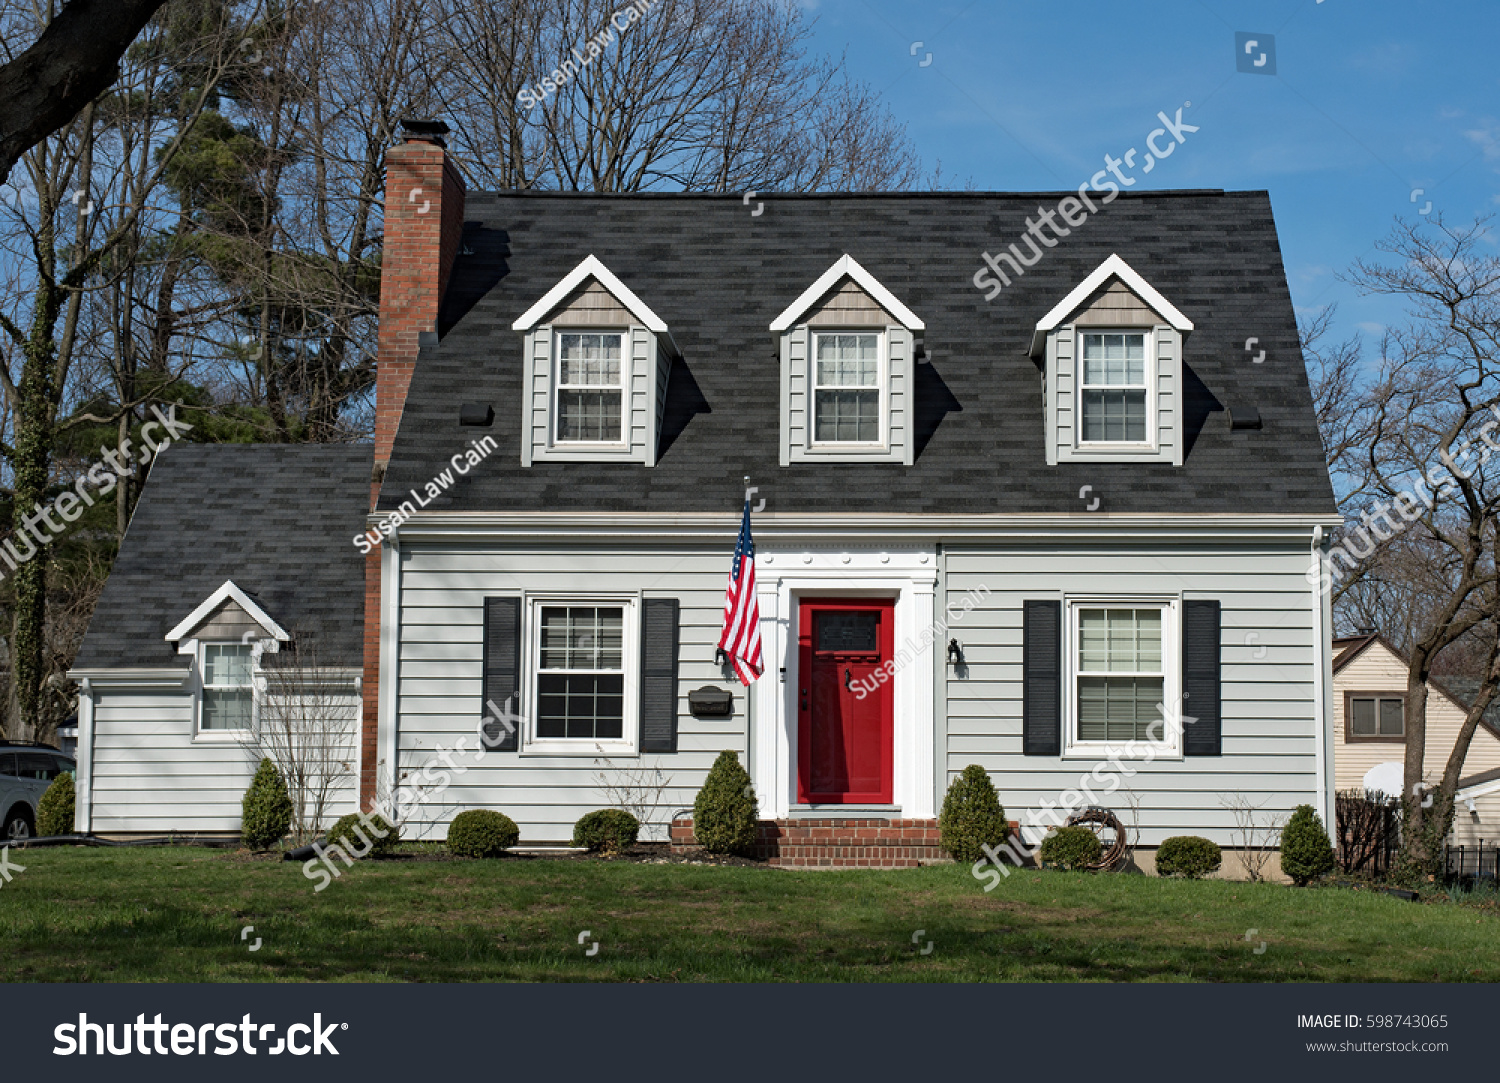 Cape Cod House with Three Dormers & Red Door #598743065